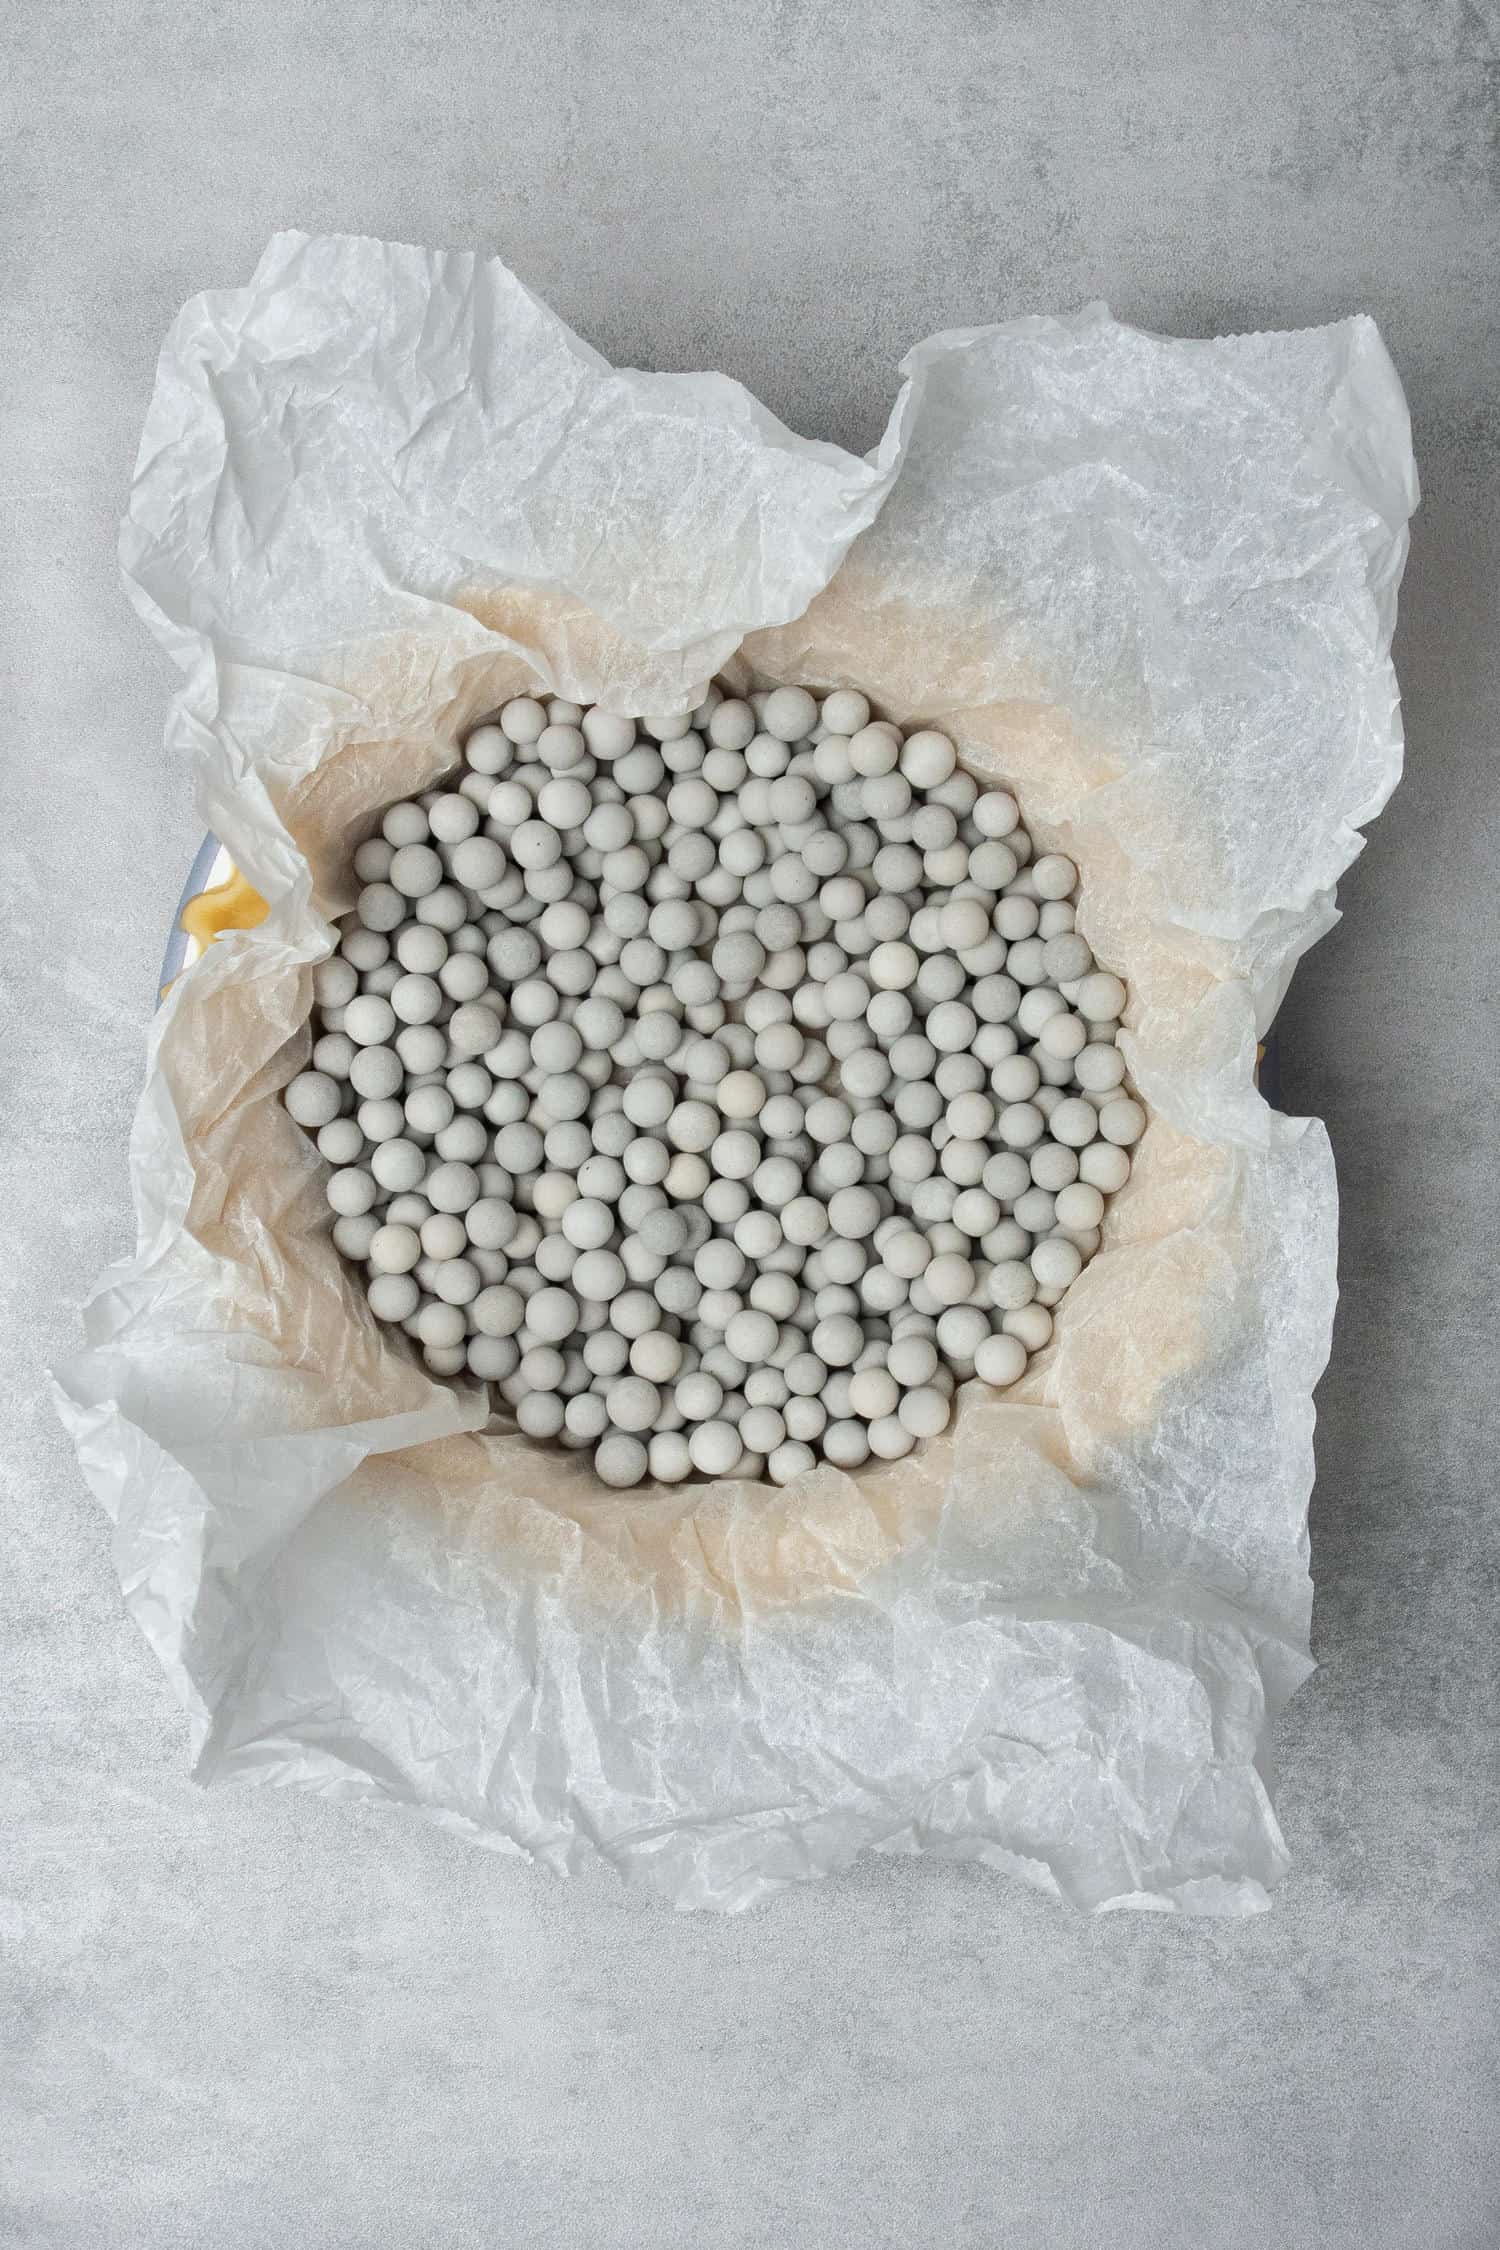 Pie dough filled with ceramic baking beans for blind baking